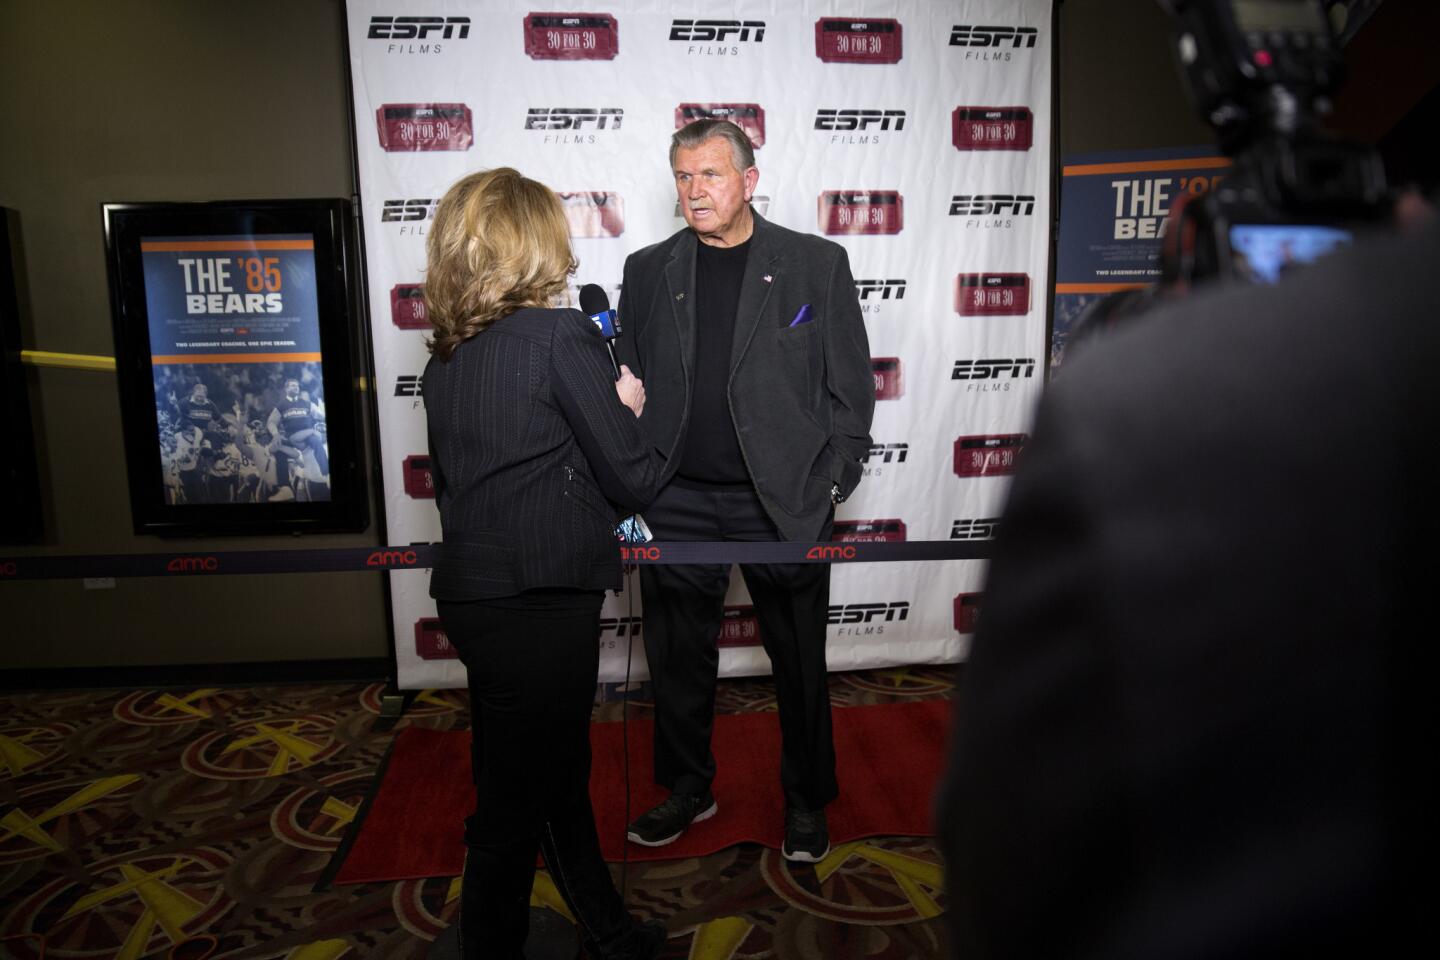 Former Bears coach Mike Ditka speaks to media at an advanced screening of "The '85 Bears" documentary about the Super Bowl XX champions on Jan. 27, 2016, at the AMC River East 21 in Chicago. This year marks the 30th anniversary of the Bears' win.